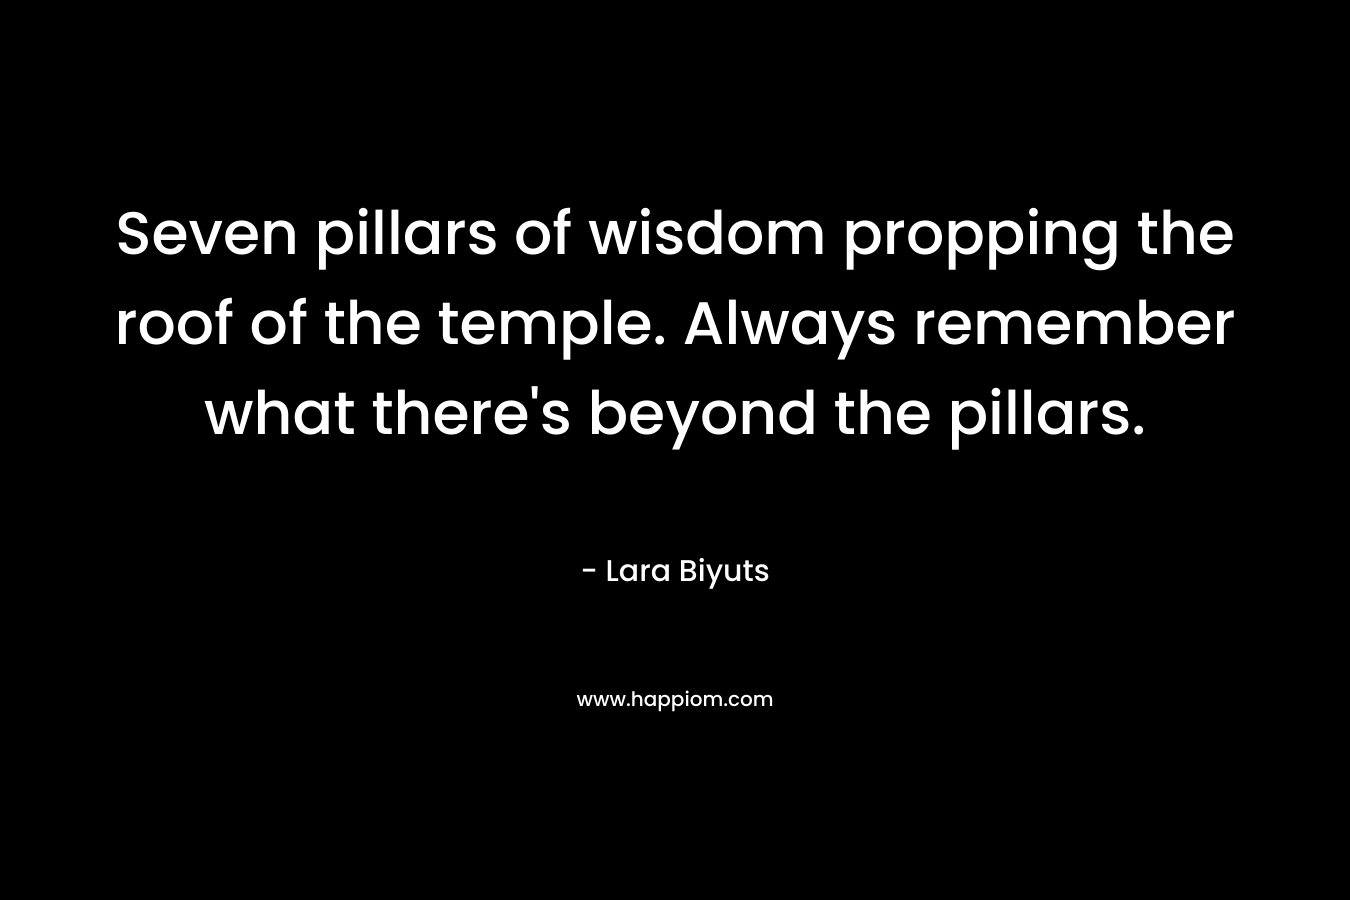 Seven pillars of wisdom propping the roof of the temple. Always remember what there’s beyond the pillars. – Lara Biyuts